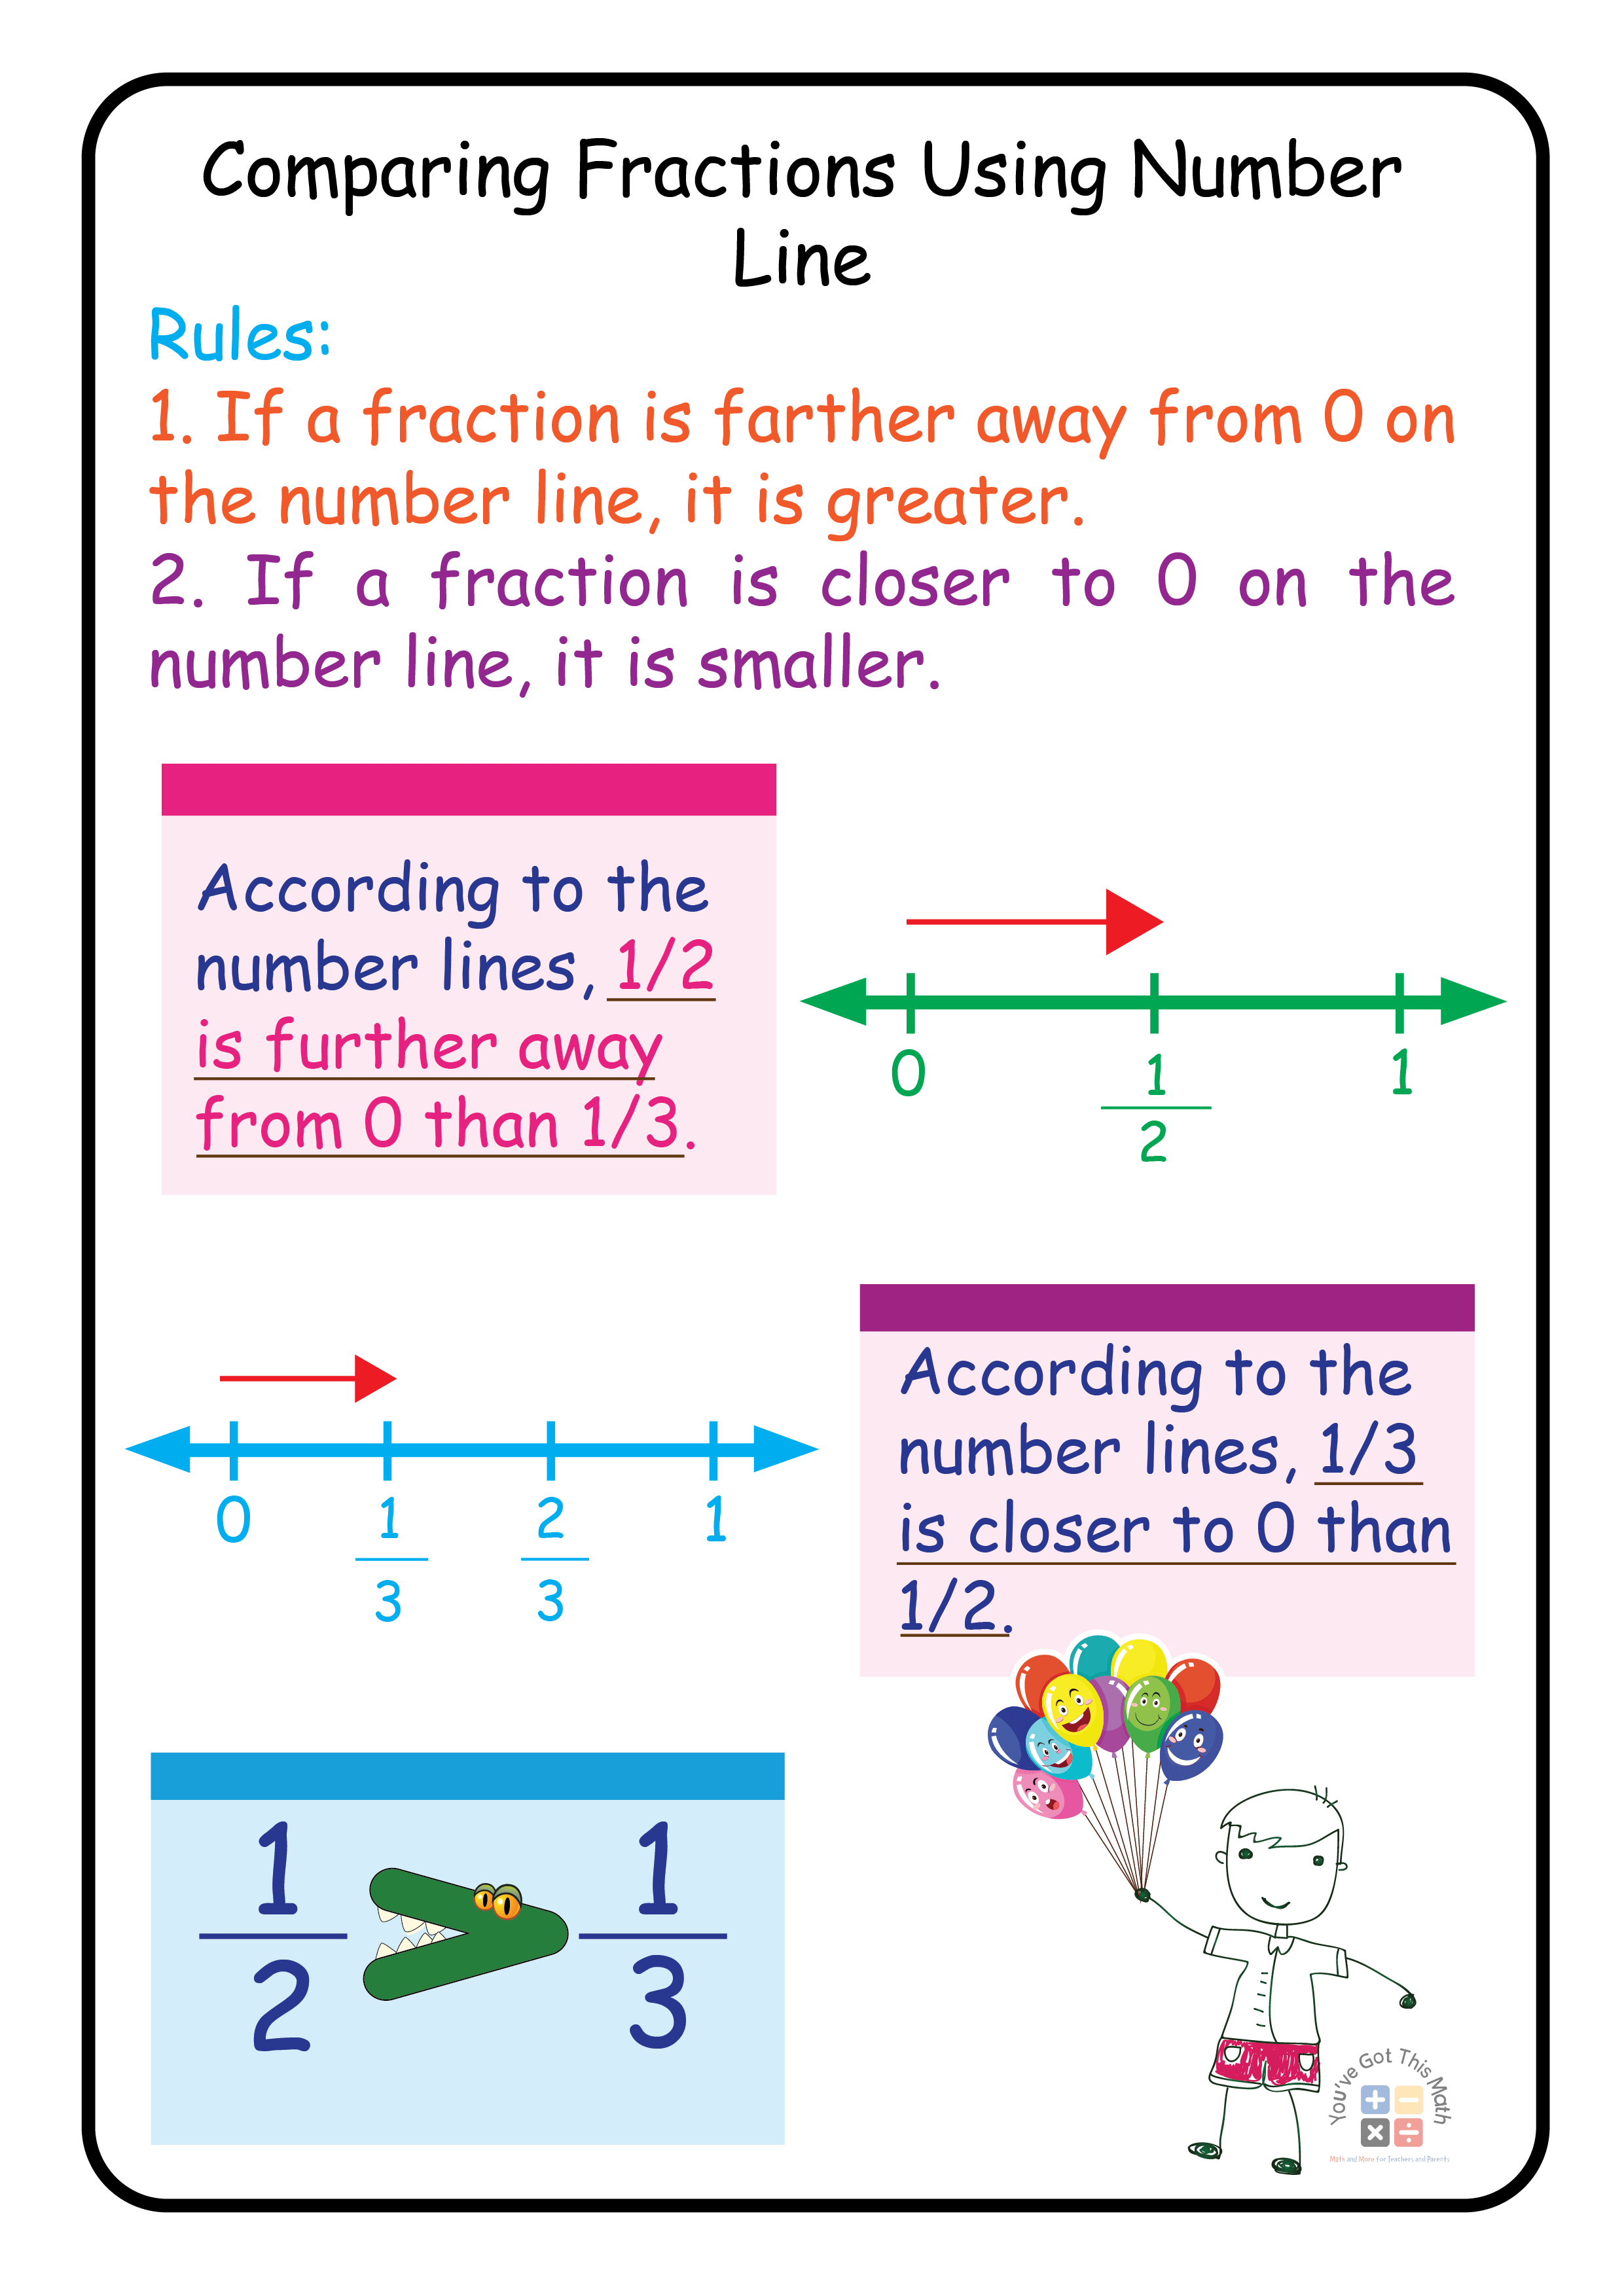 Comparing Fractions Using Number Line